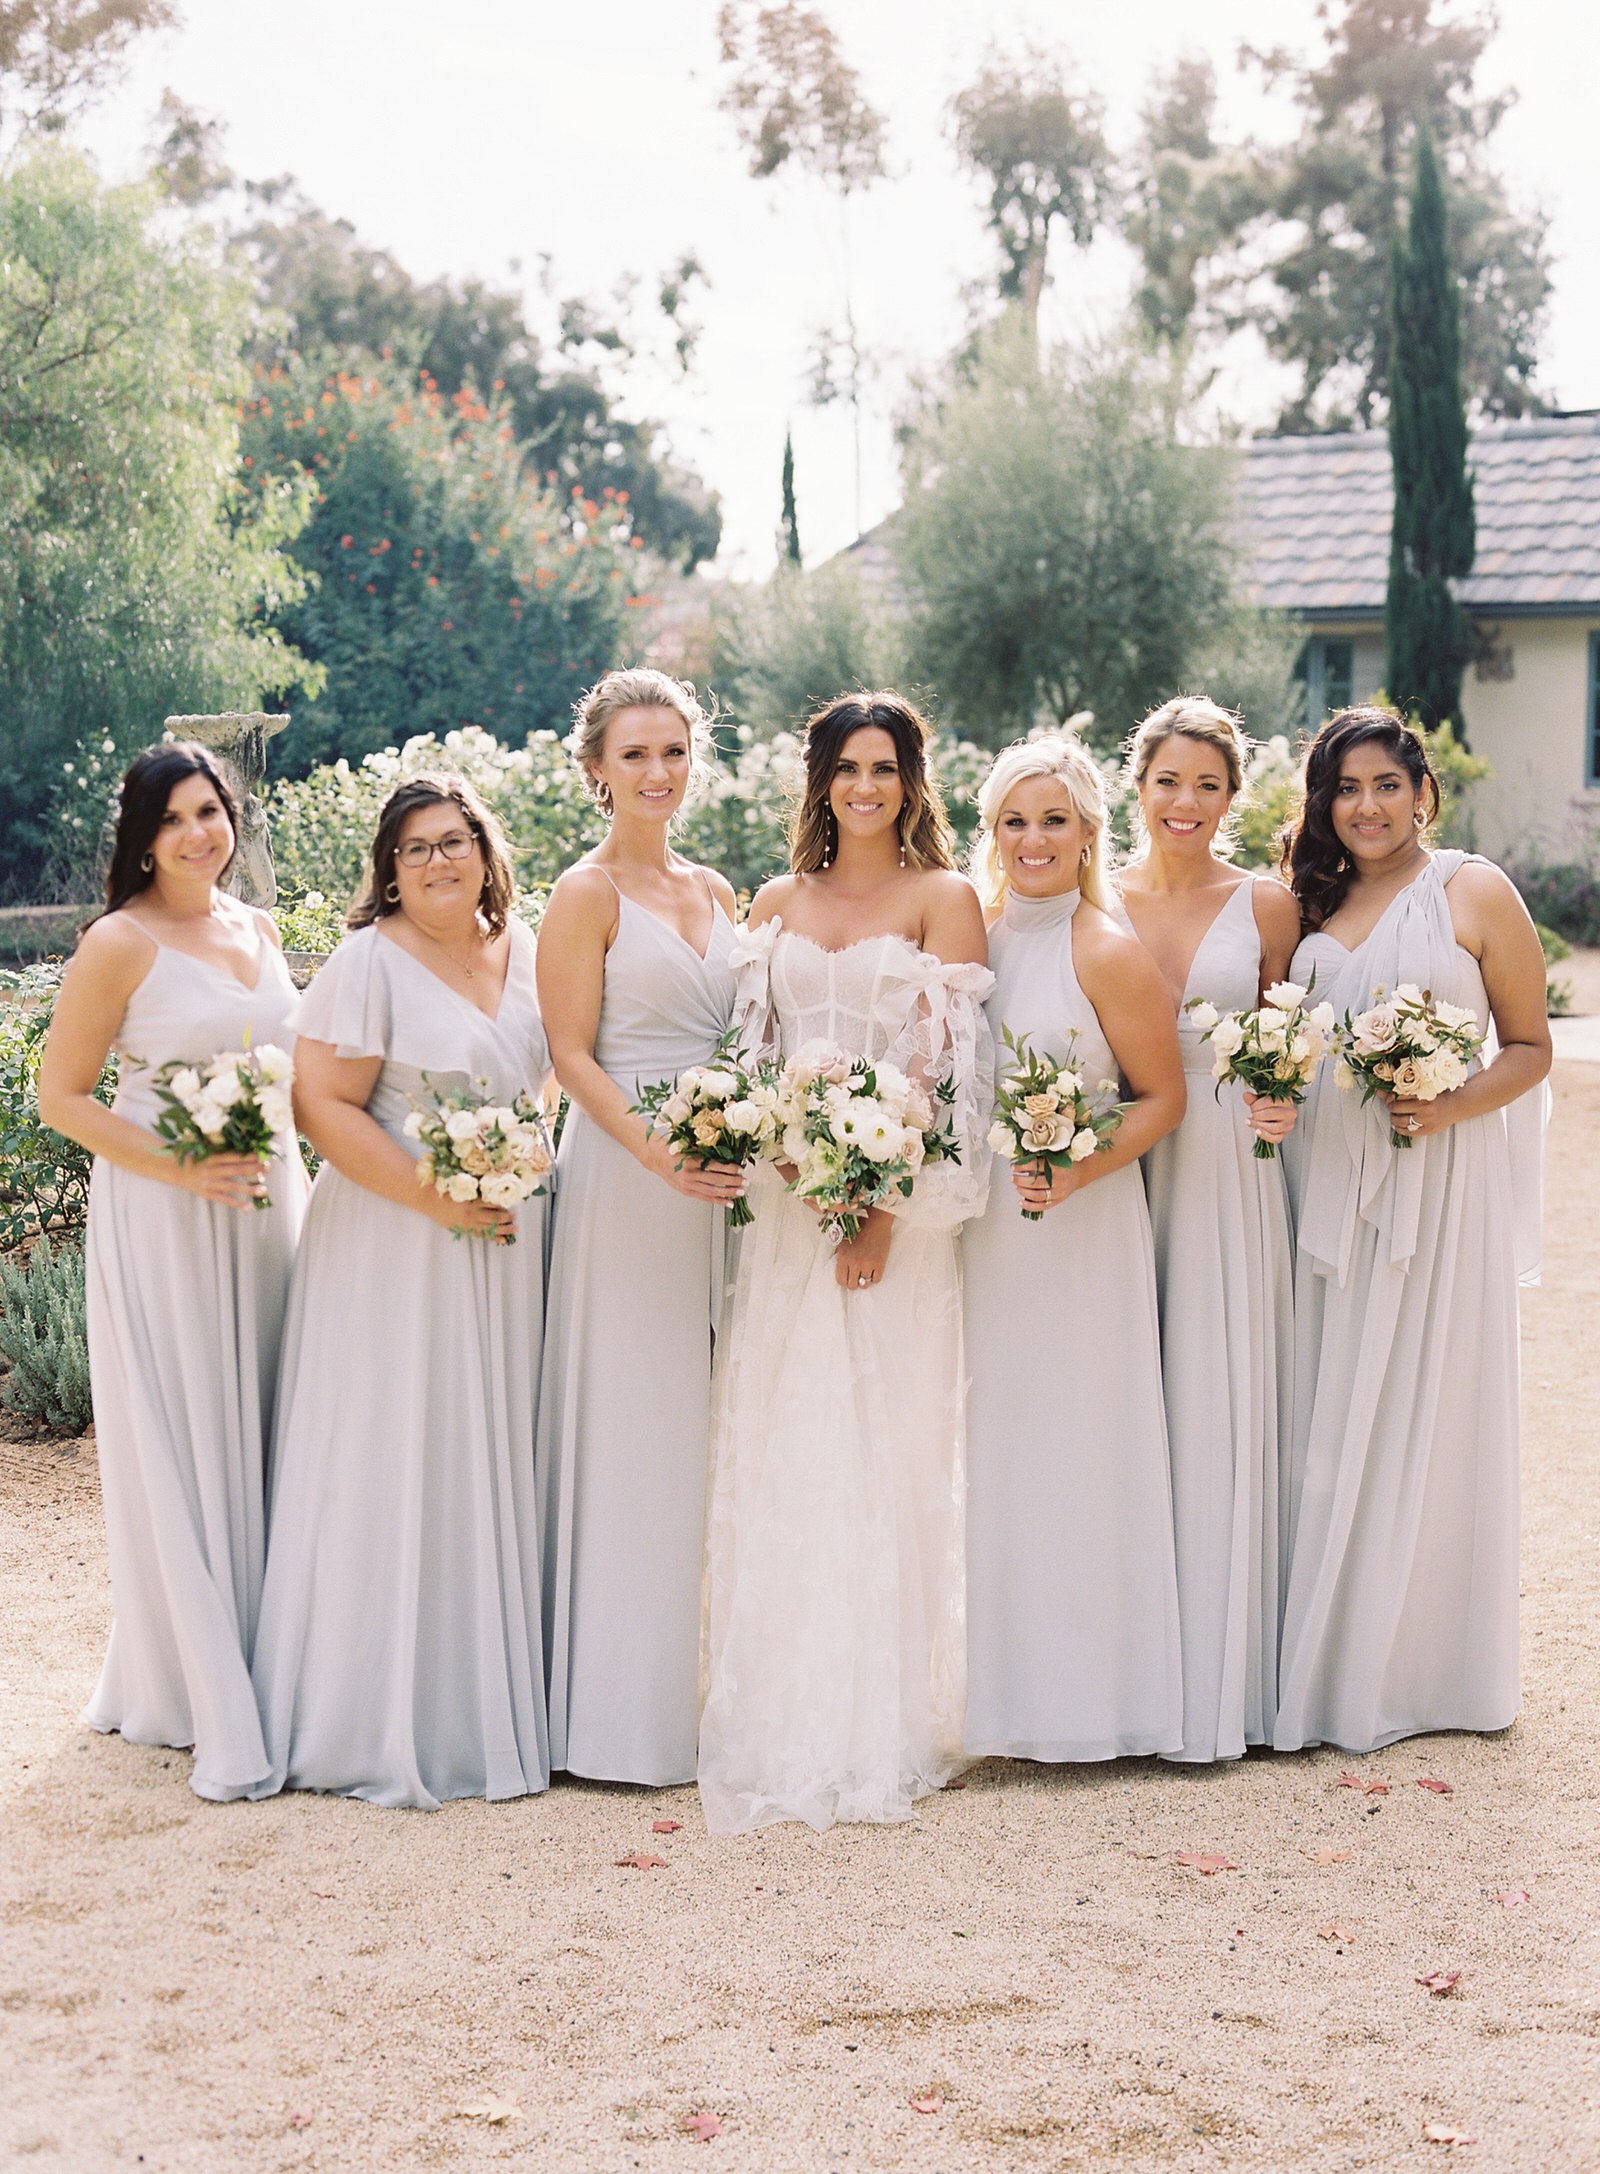 An Intimate Wedding in California with a Classic Provençal Aesthetic ...